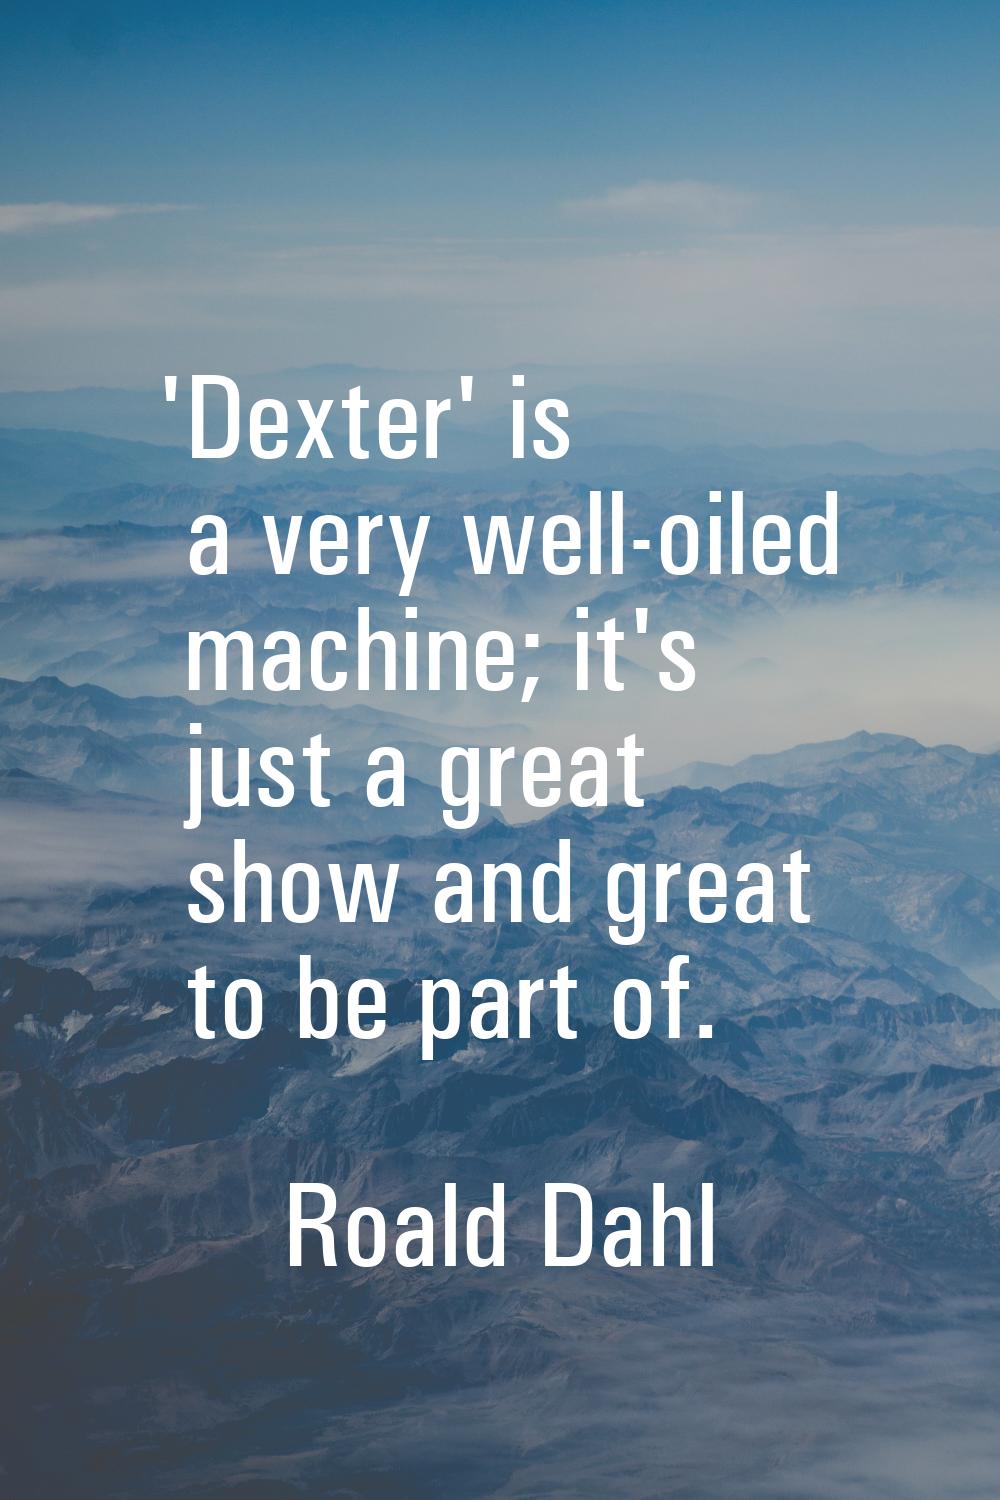 'Dexter' is a very well-oiled machine; it's just a great show and great to be part of.